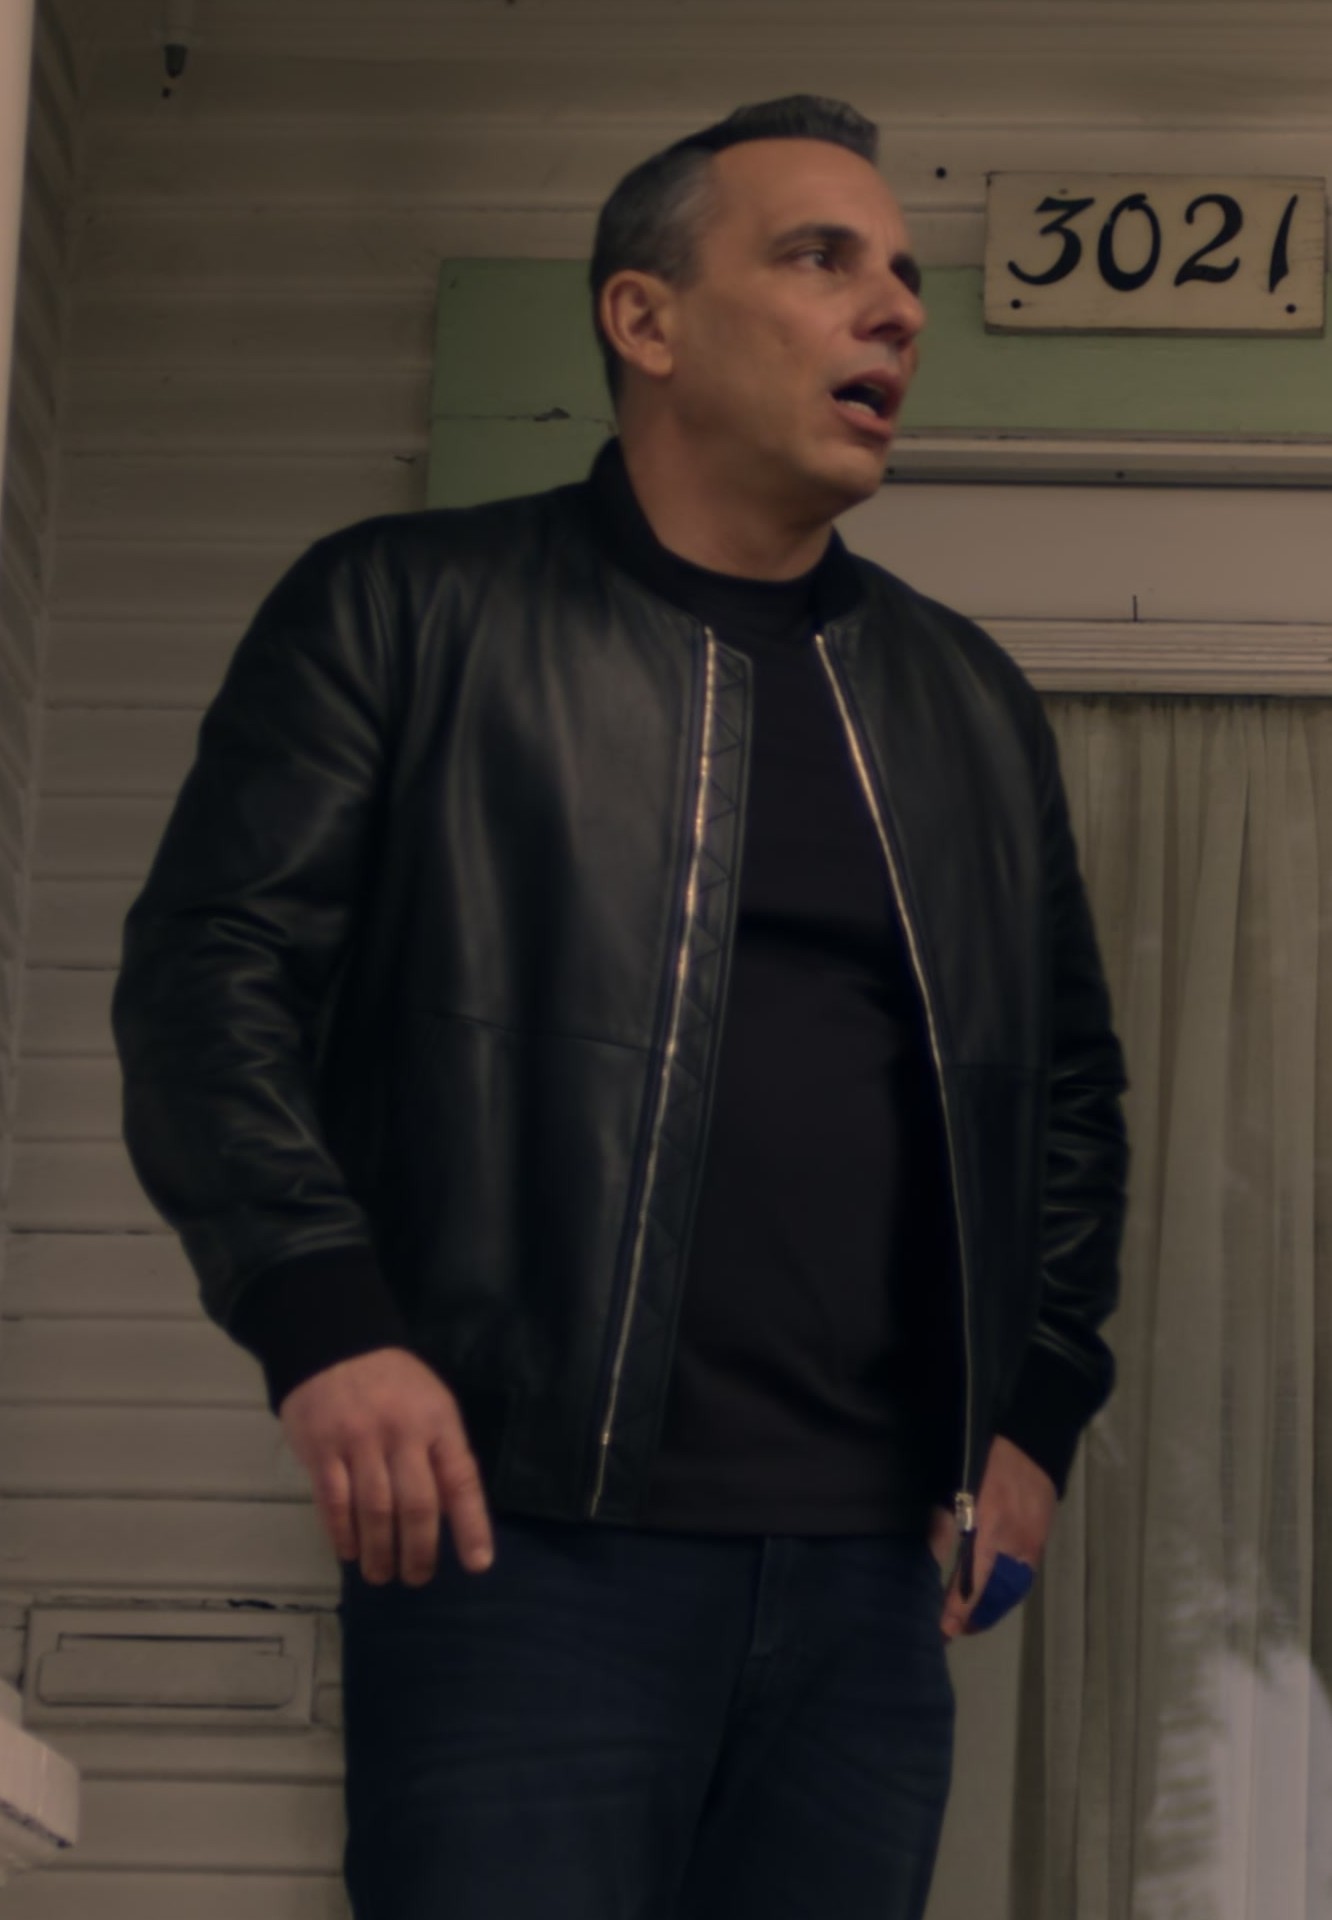 Worn on Bookie TV Show - Black Leather Bomber Jacket Worn by Sebastian Maniscalco as Danny